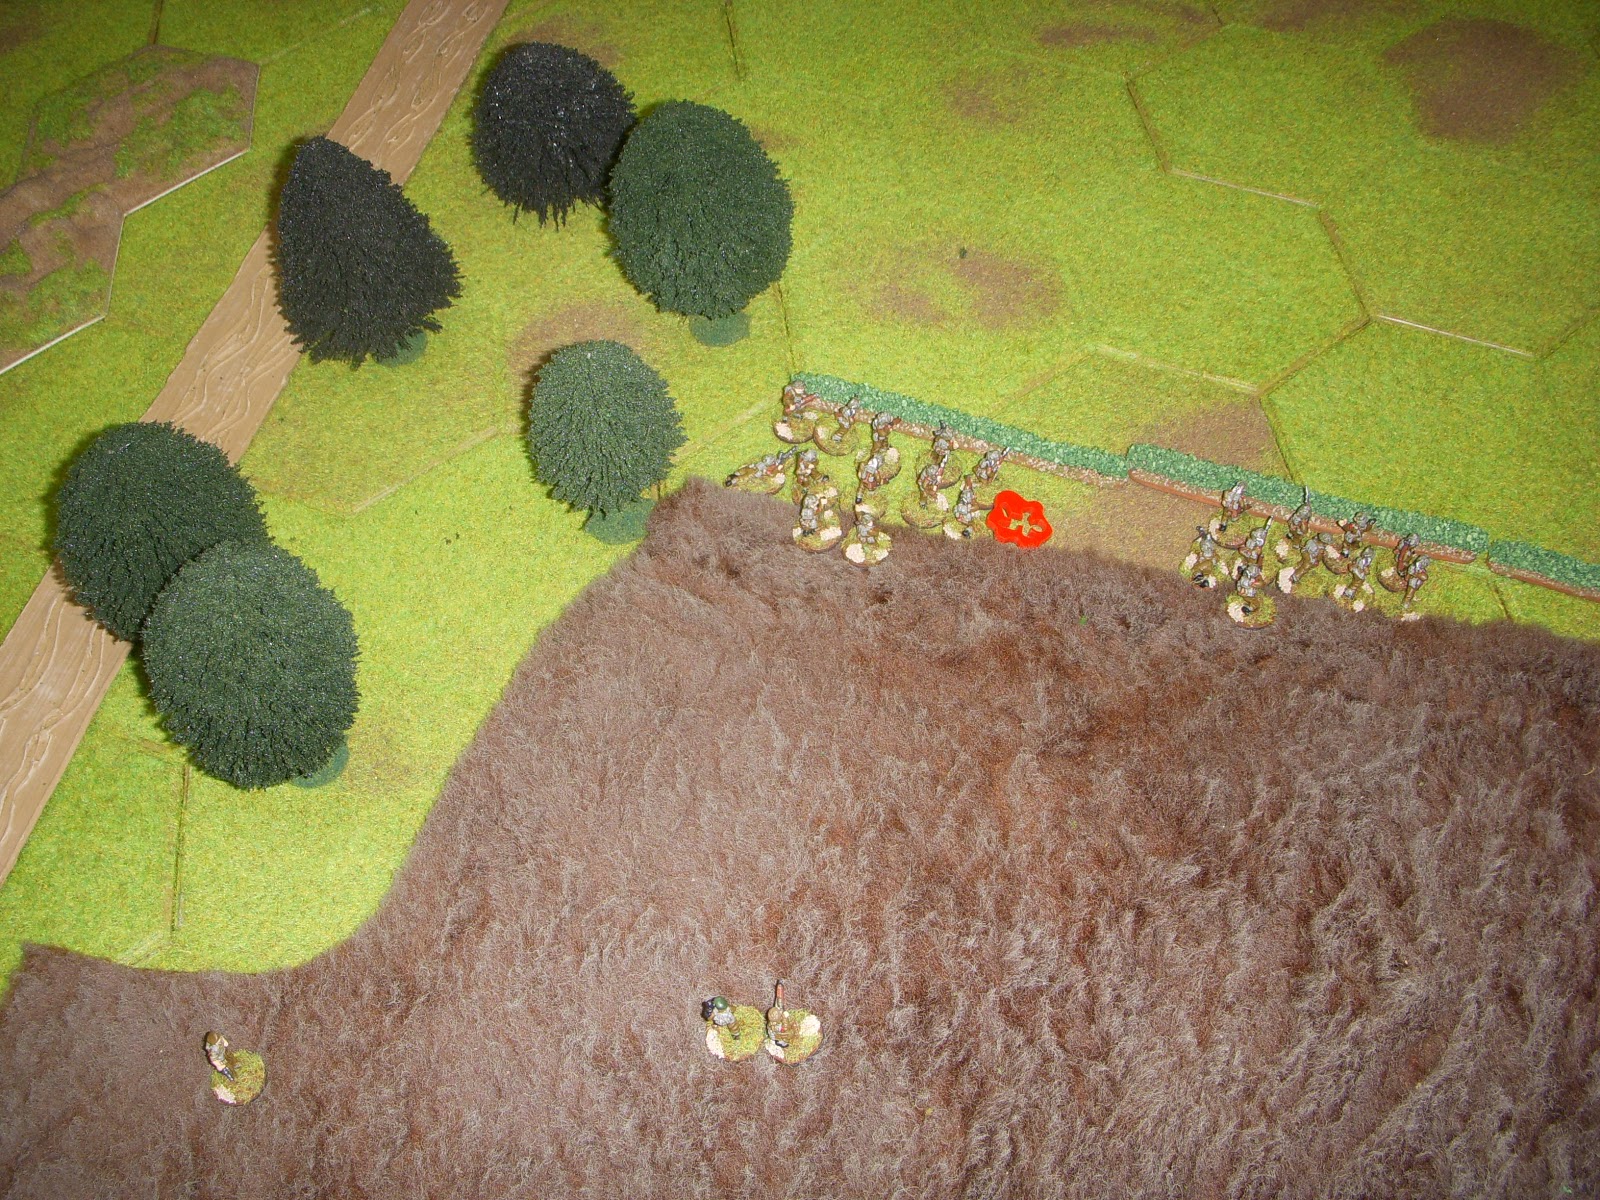  They start taking casualties from the MG in the stone farmhouse on the hill. 